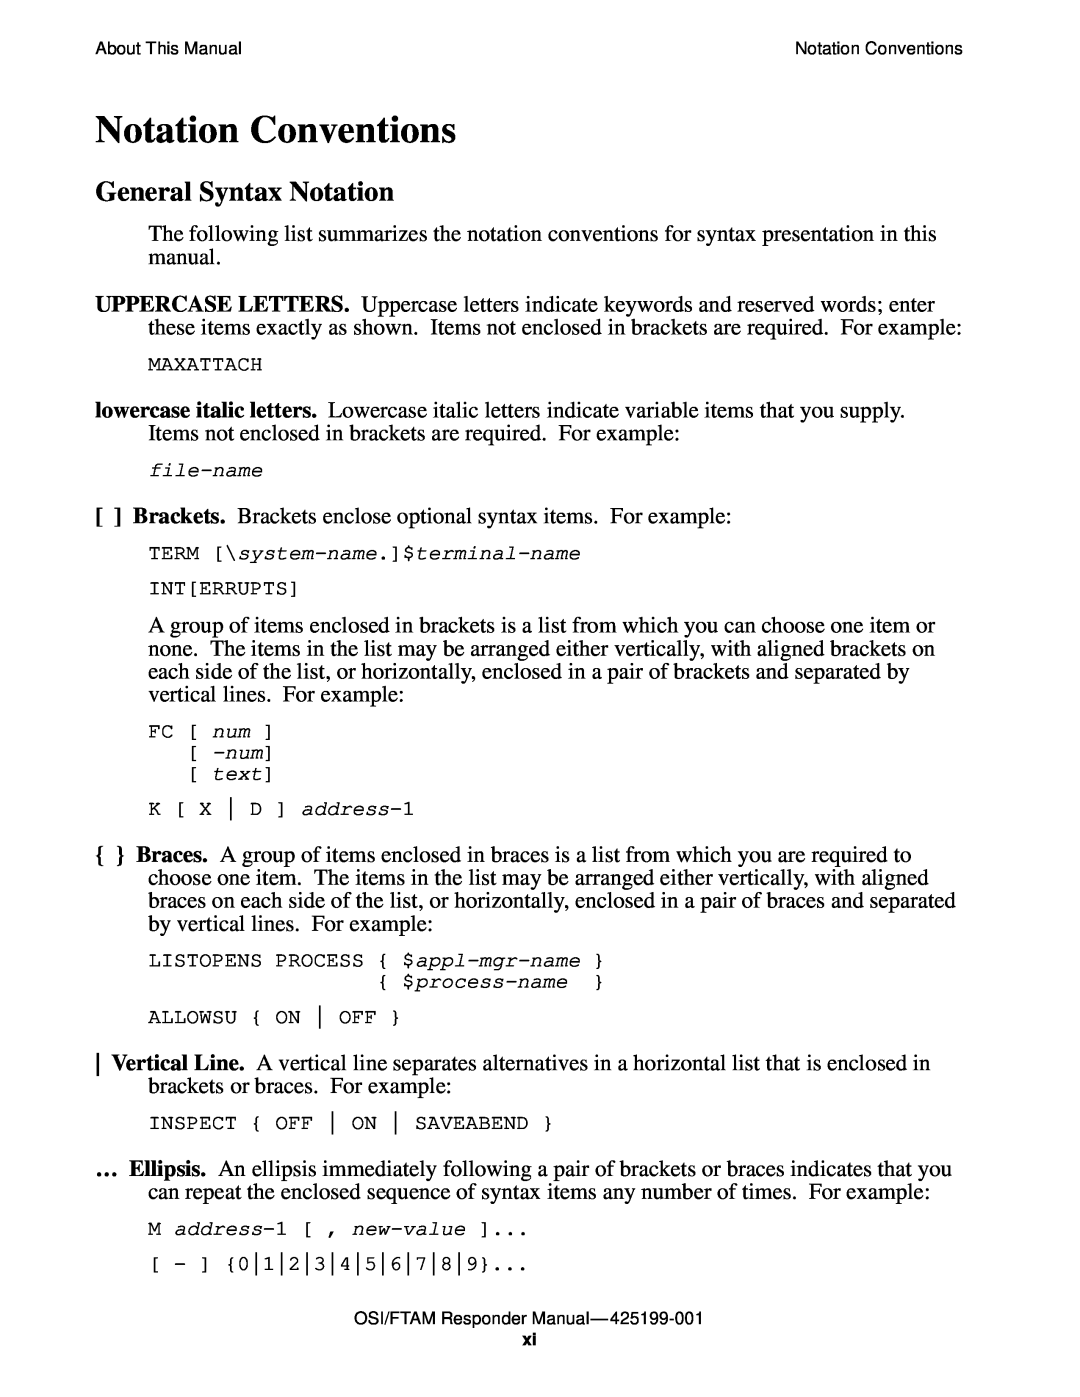 Compaq OSI/FTAM D43, OSI/APLMGR D43 manual Notation Conventions, General Syntax Notation 